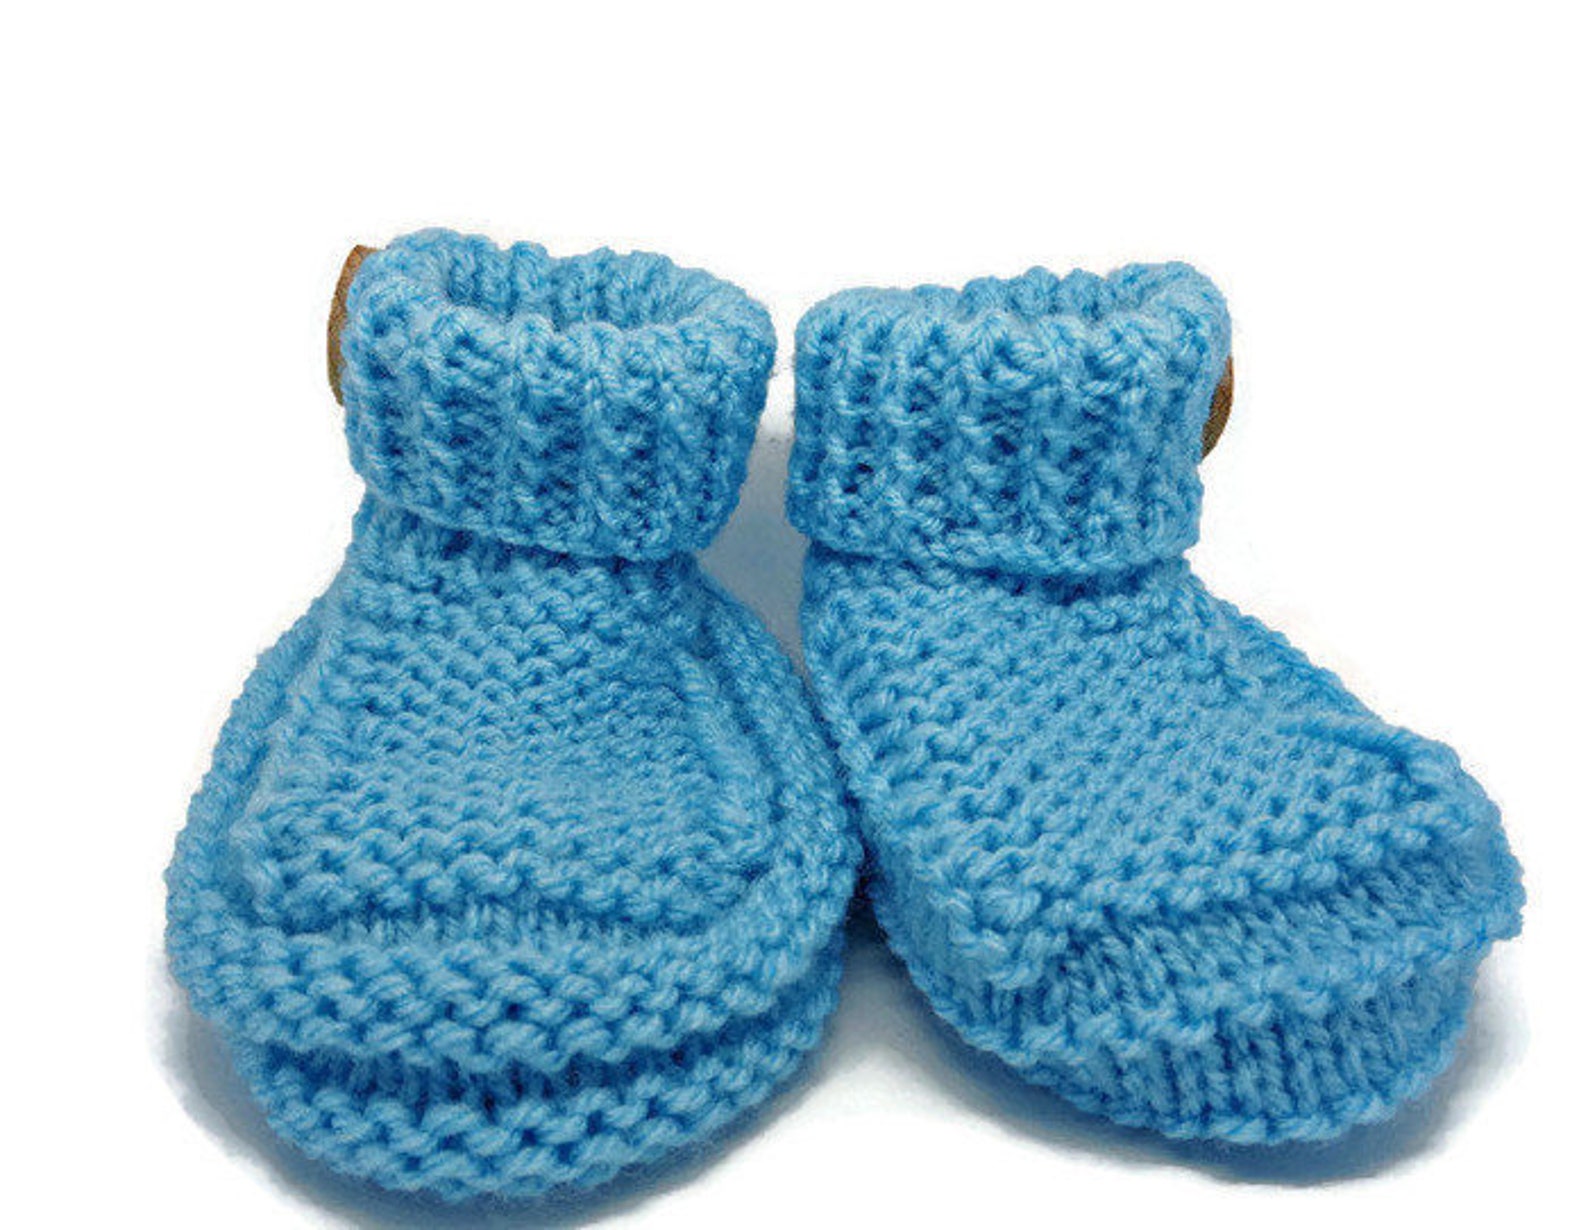 Blue baby bootees baby girl bootees aqua blue bootees blue | Etsy